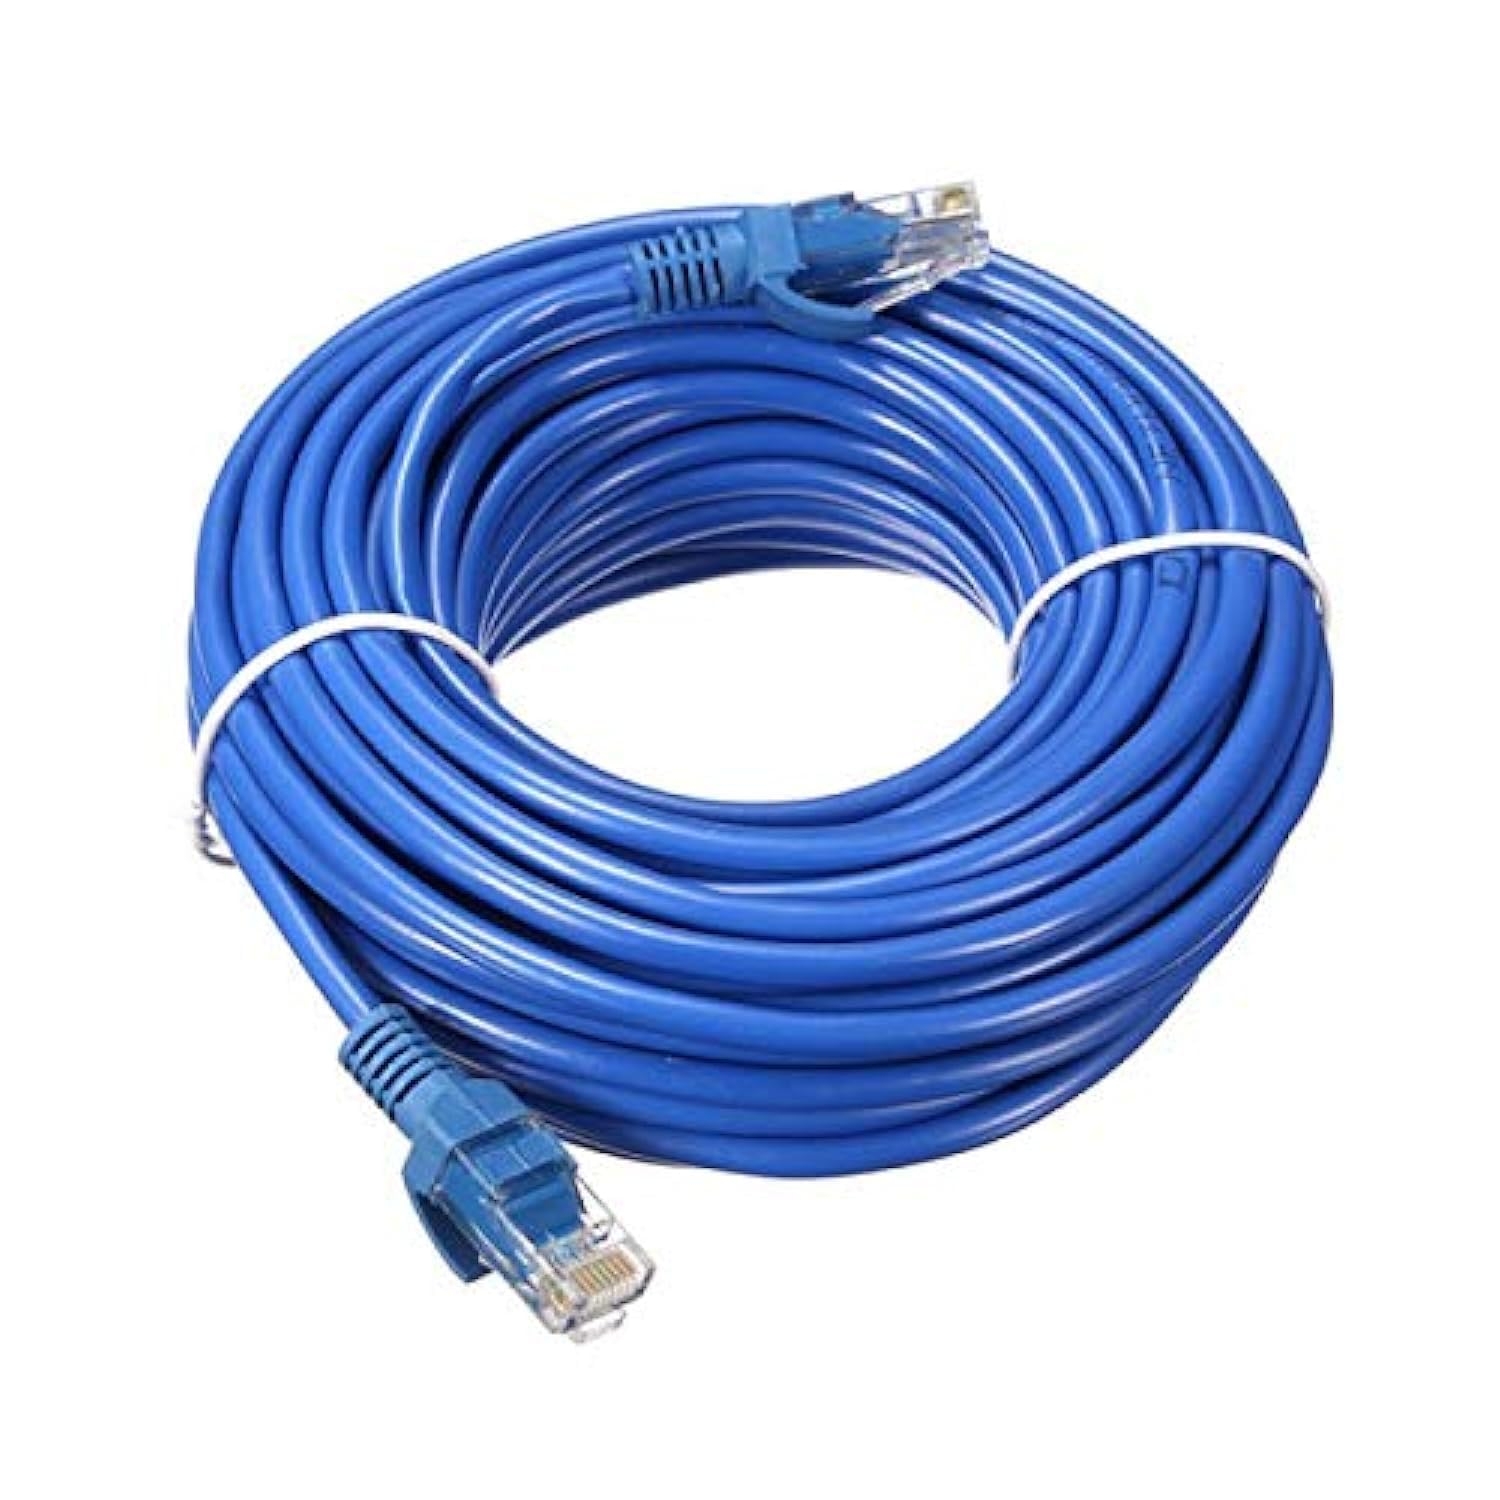 ANDTRONICS CAT-6 Snagless Network RJ45 Ethernet Patch LAN Cable CAT6-40M / 120 ft